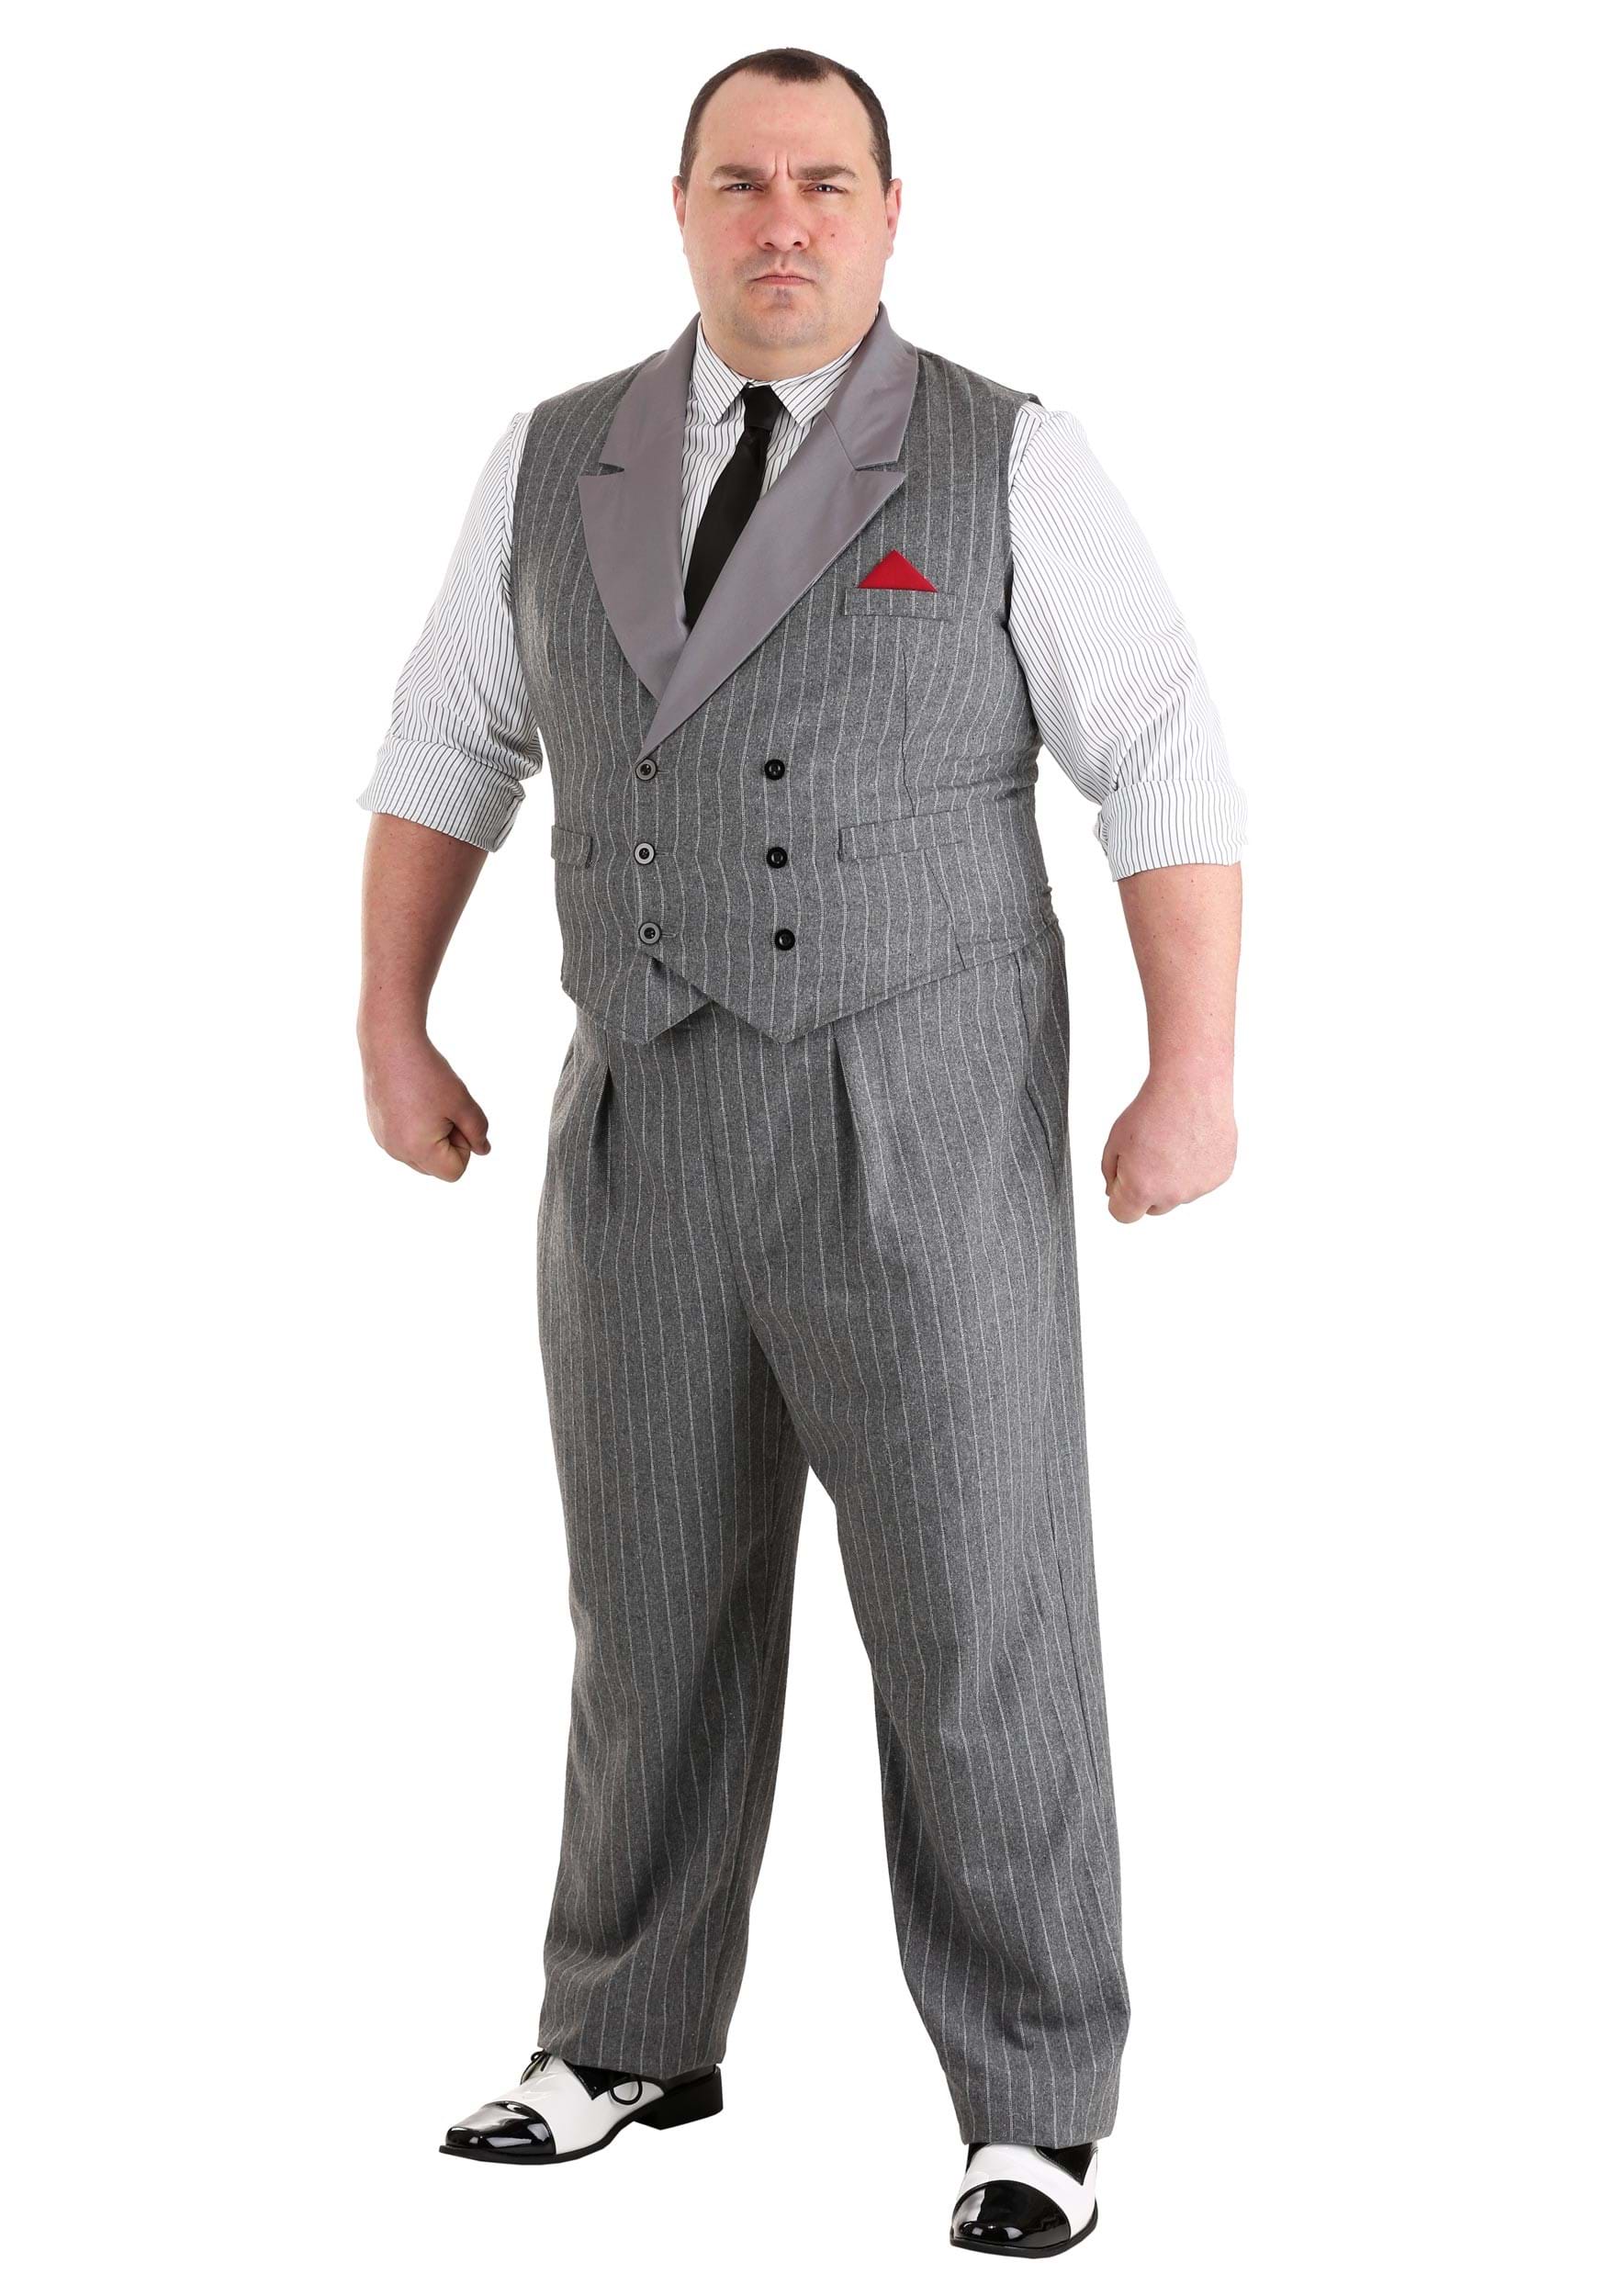 1930s Men’s Costumes: Gangster, Clyde Barrow, Monster Movies Plus Size Mens Ruthless Gangster Costume $74.99 AT vintagedancer.com